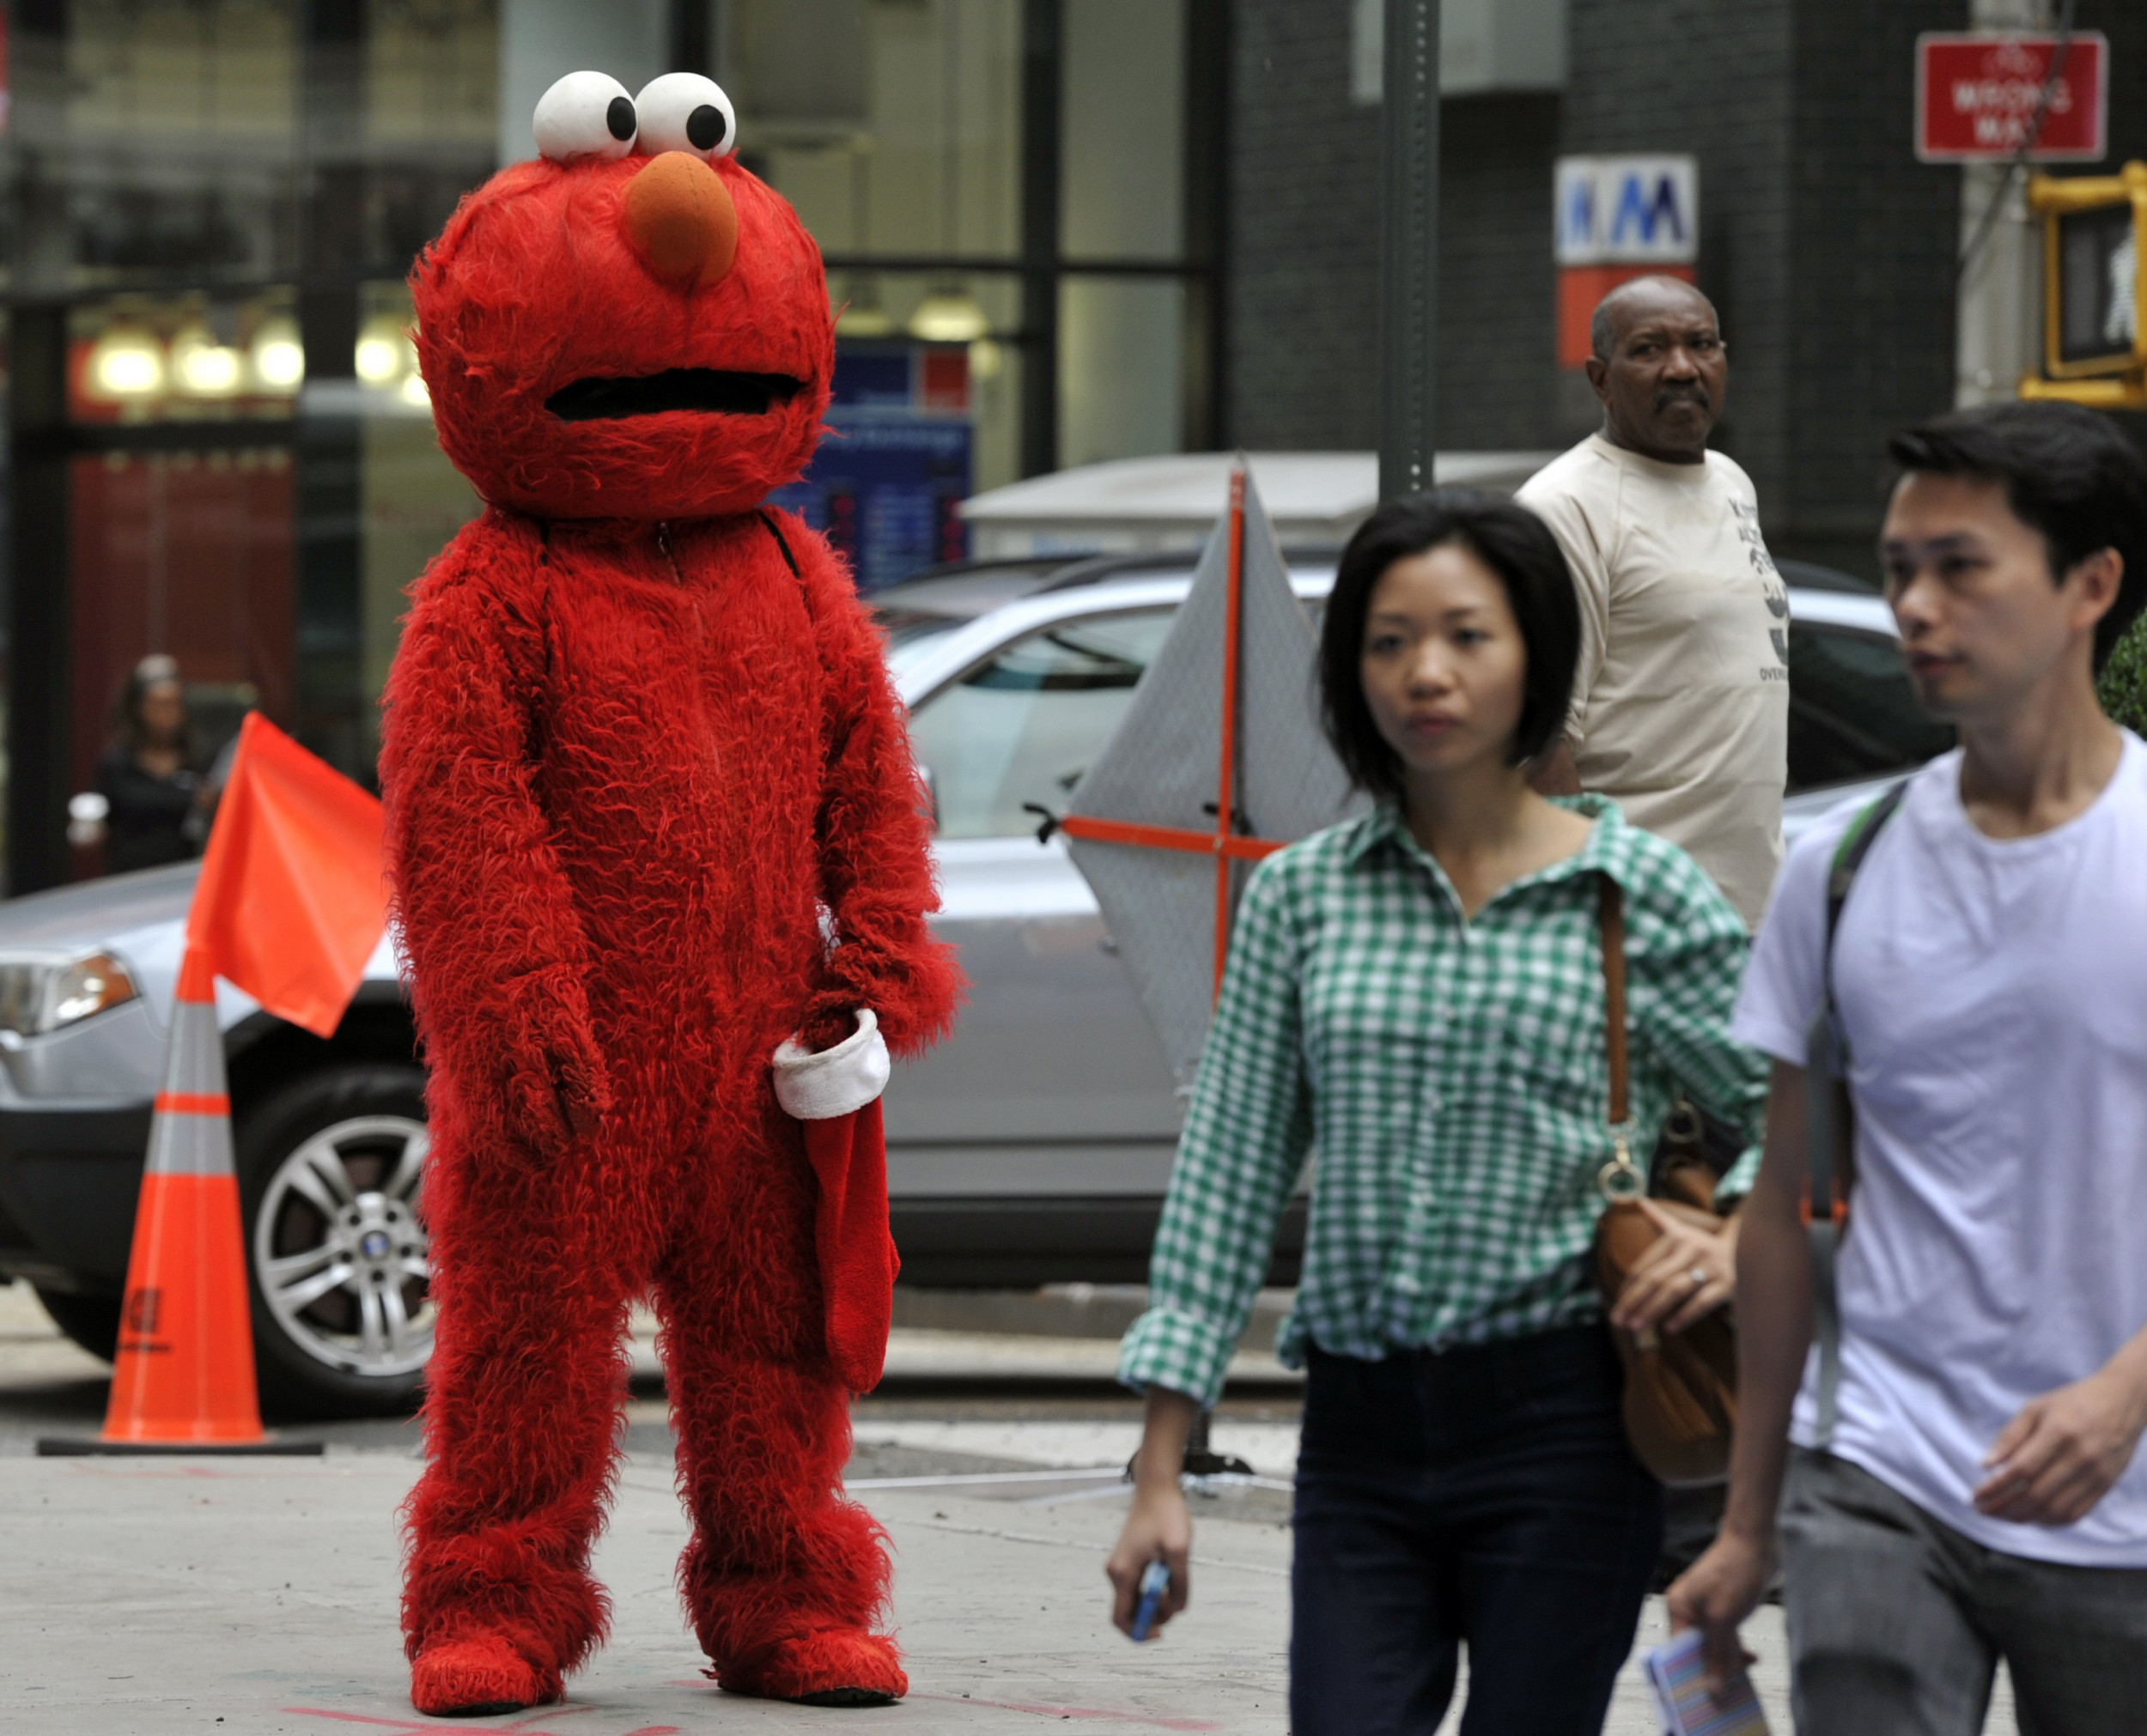 Man dressed as Elmo arrested for allegedly groping a 14-year-old tourist in...